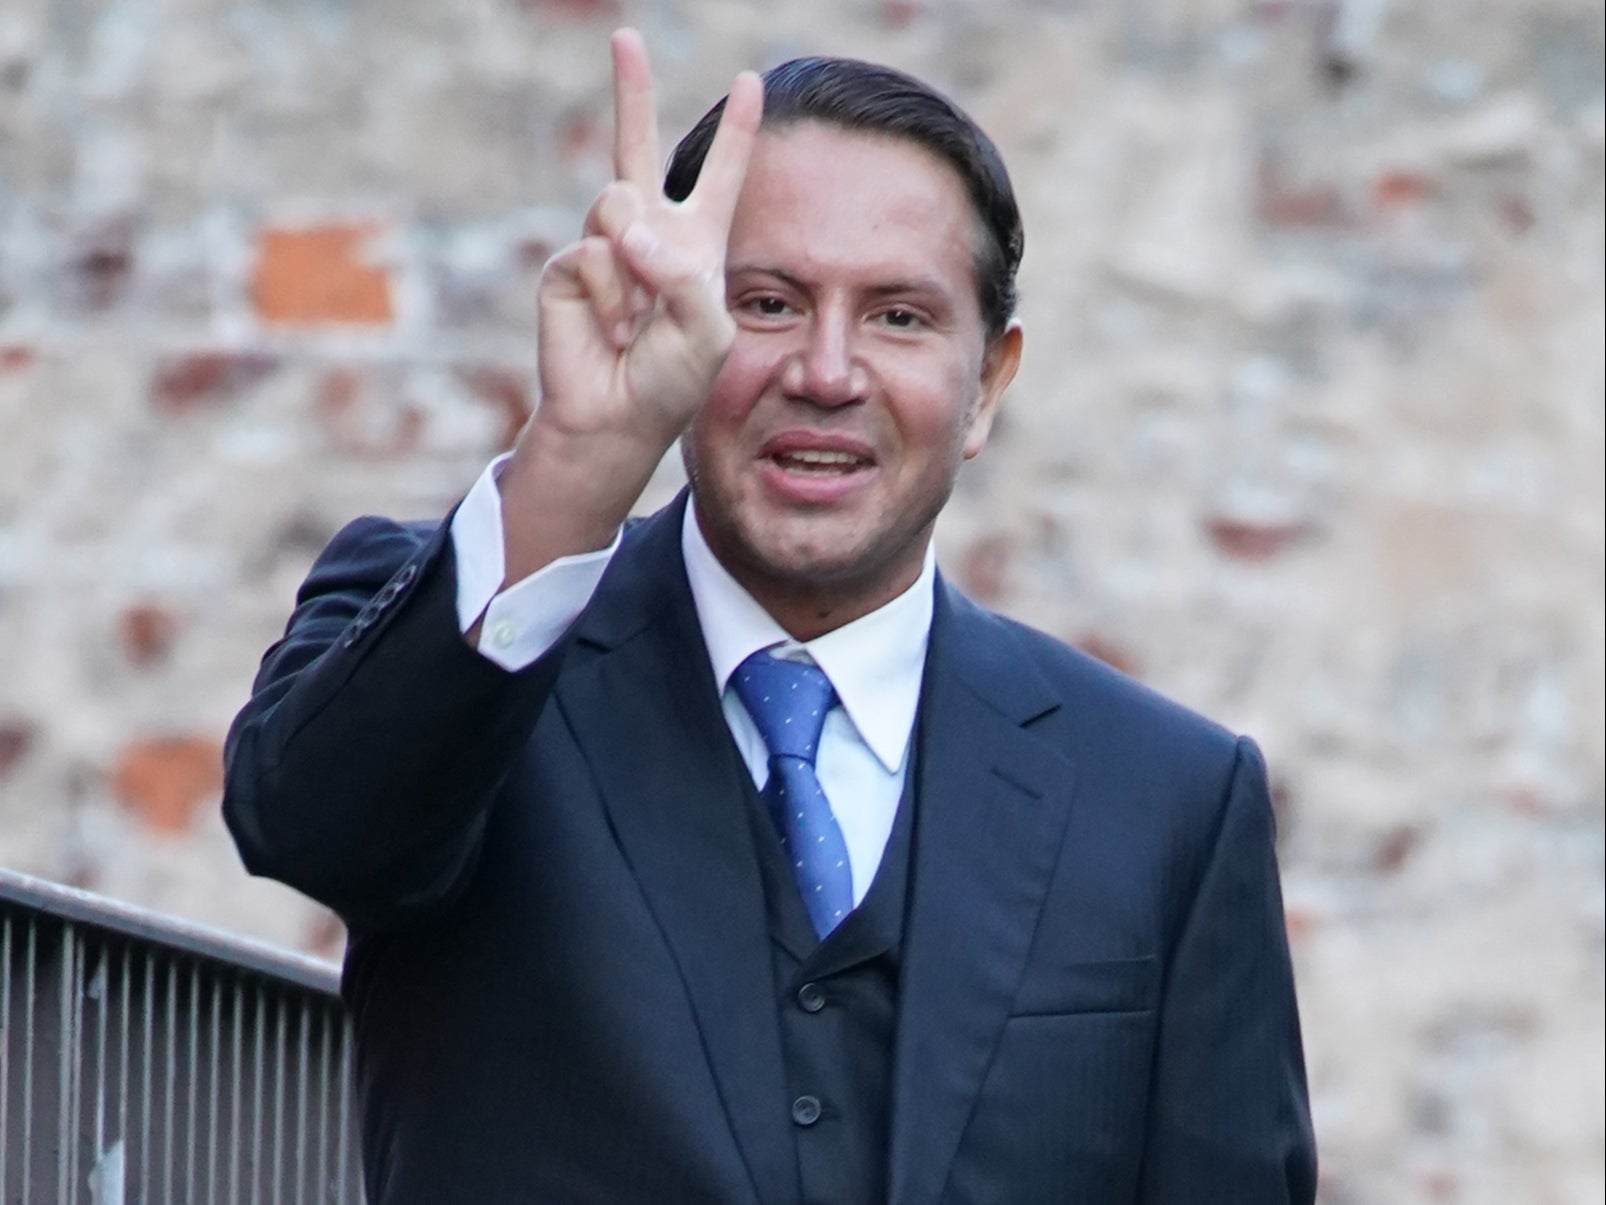 Socialite James Stunt makes a hand gesture as he arrives at Leeds Crown Court on 5 January